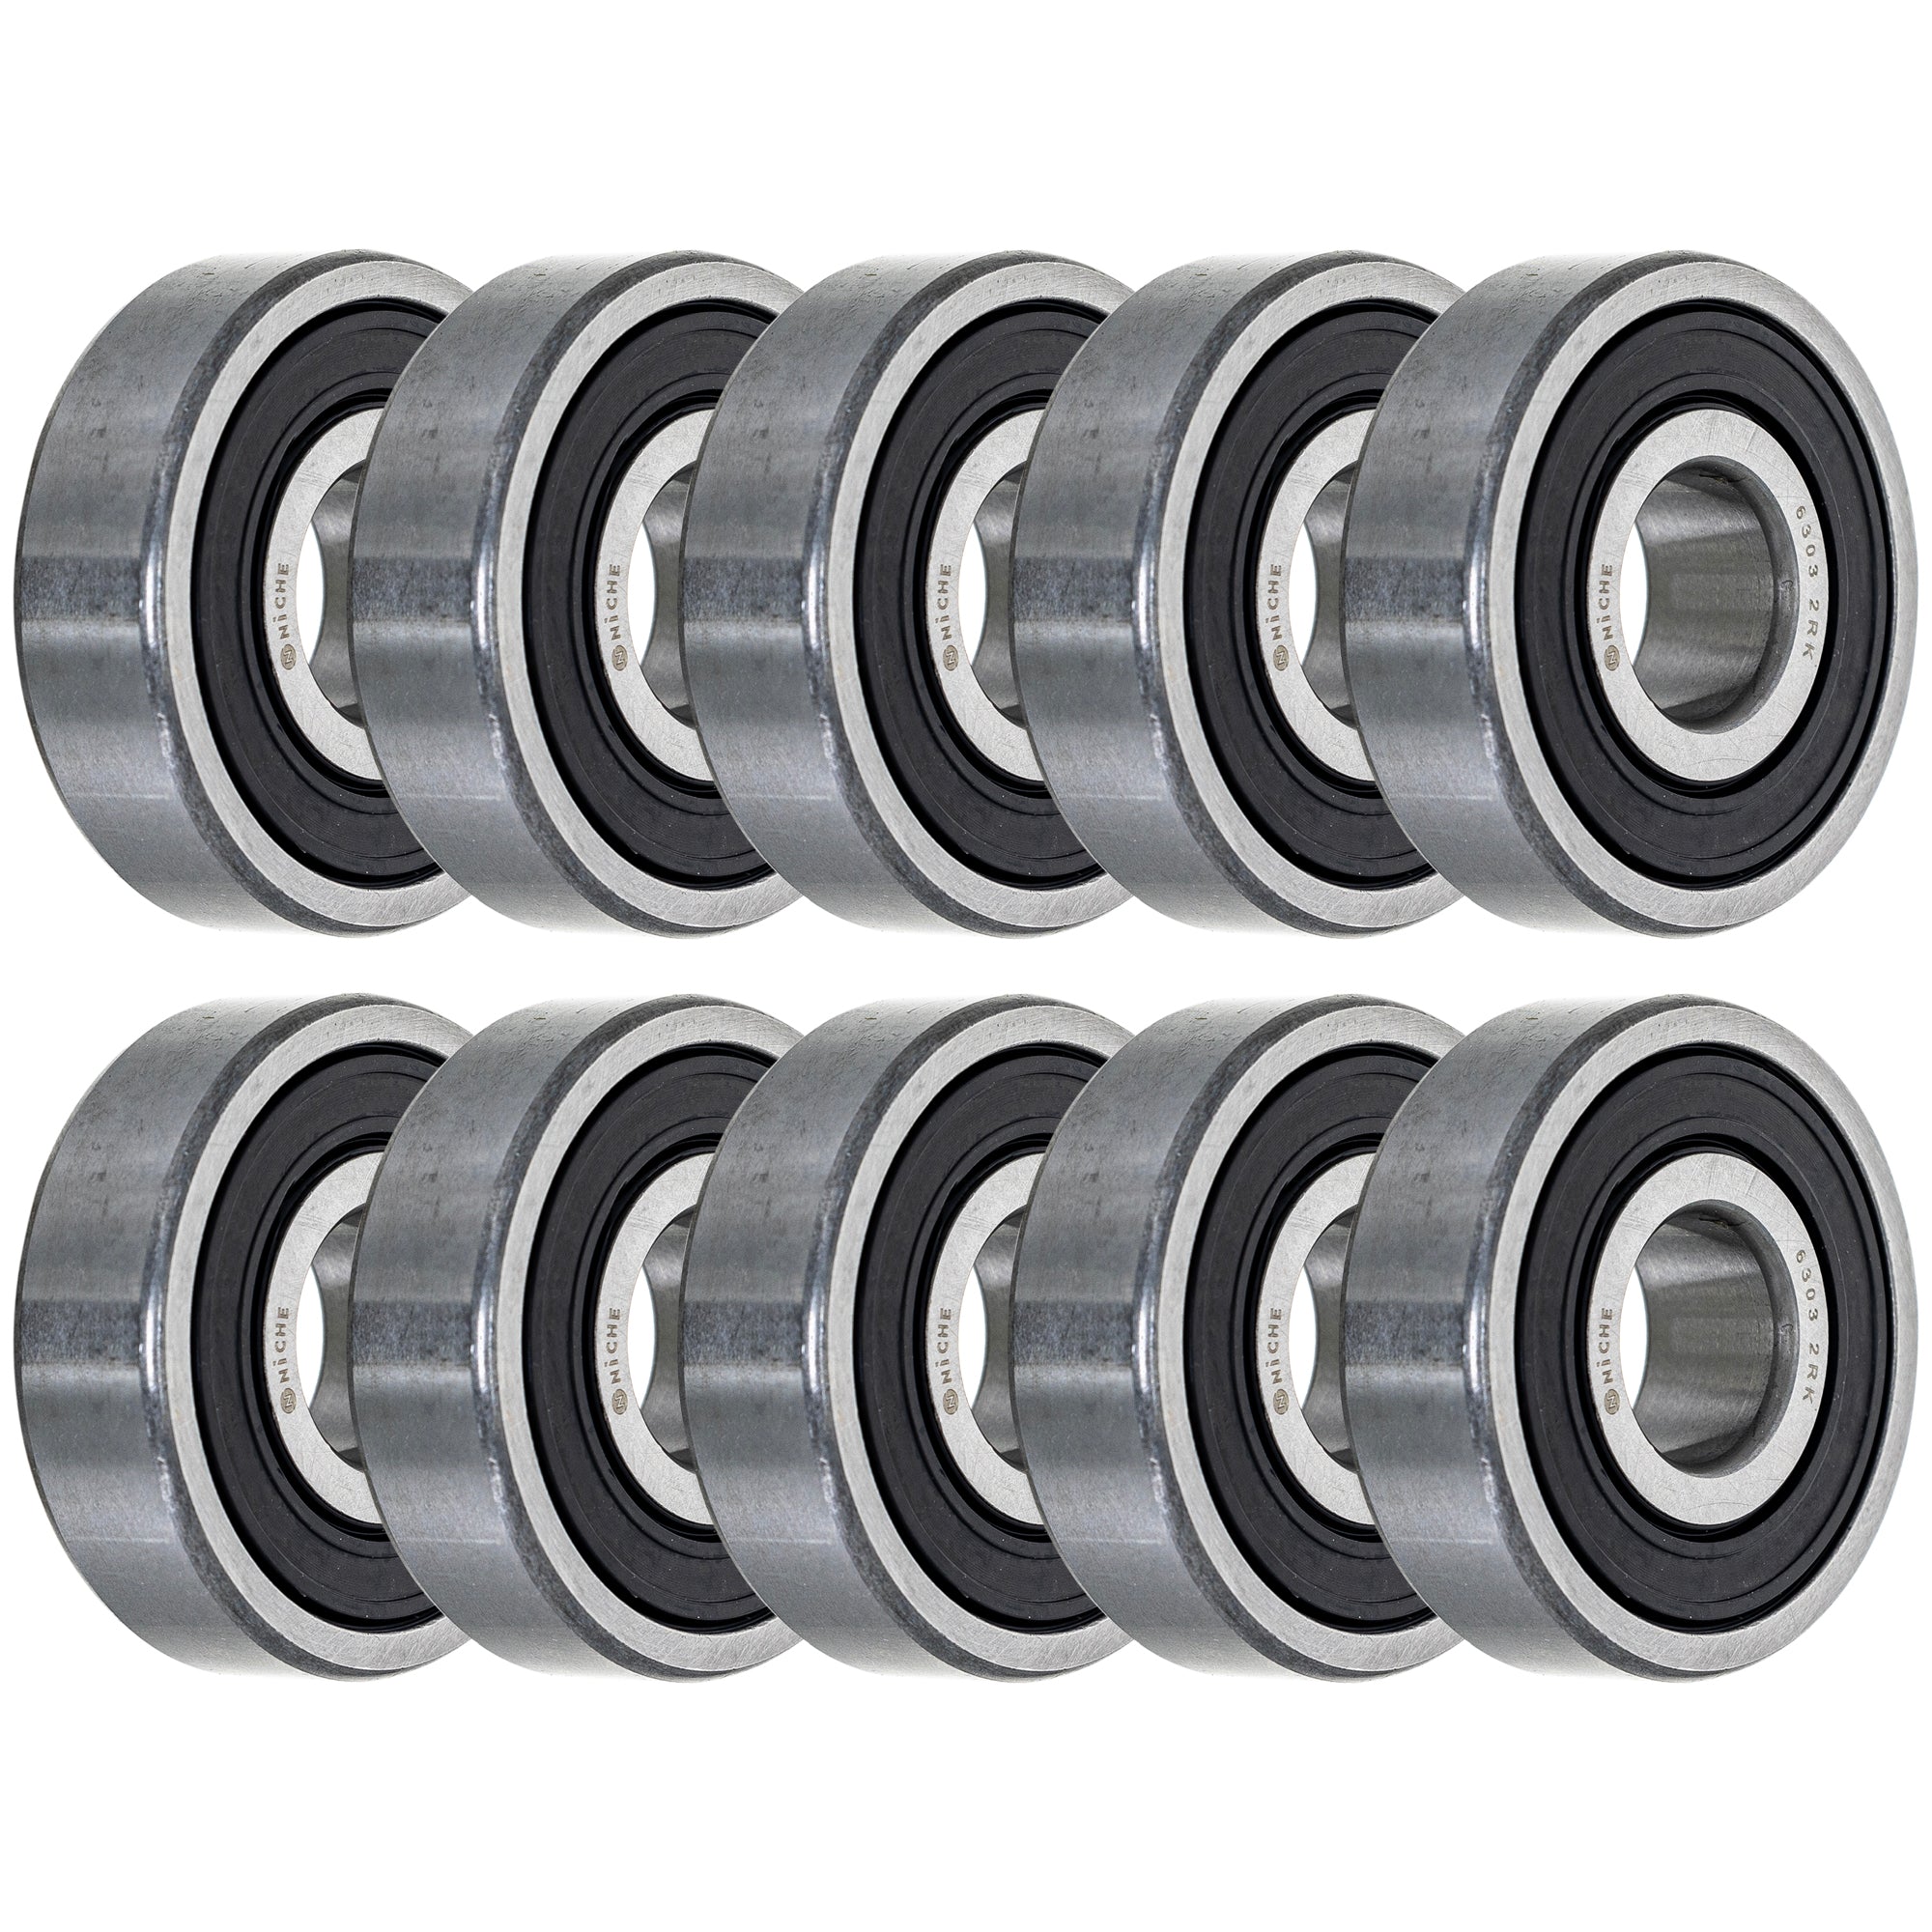 Electric Grade, Single Row, Deep Groove, Ball Bearing Pack of 10 10-Pack for zOTHER XR650L NICHE 519-CBB2328R